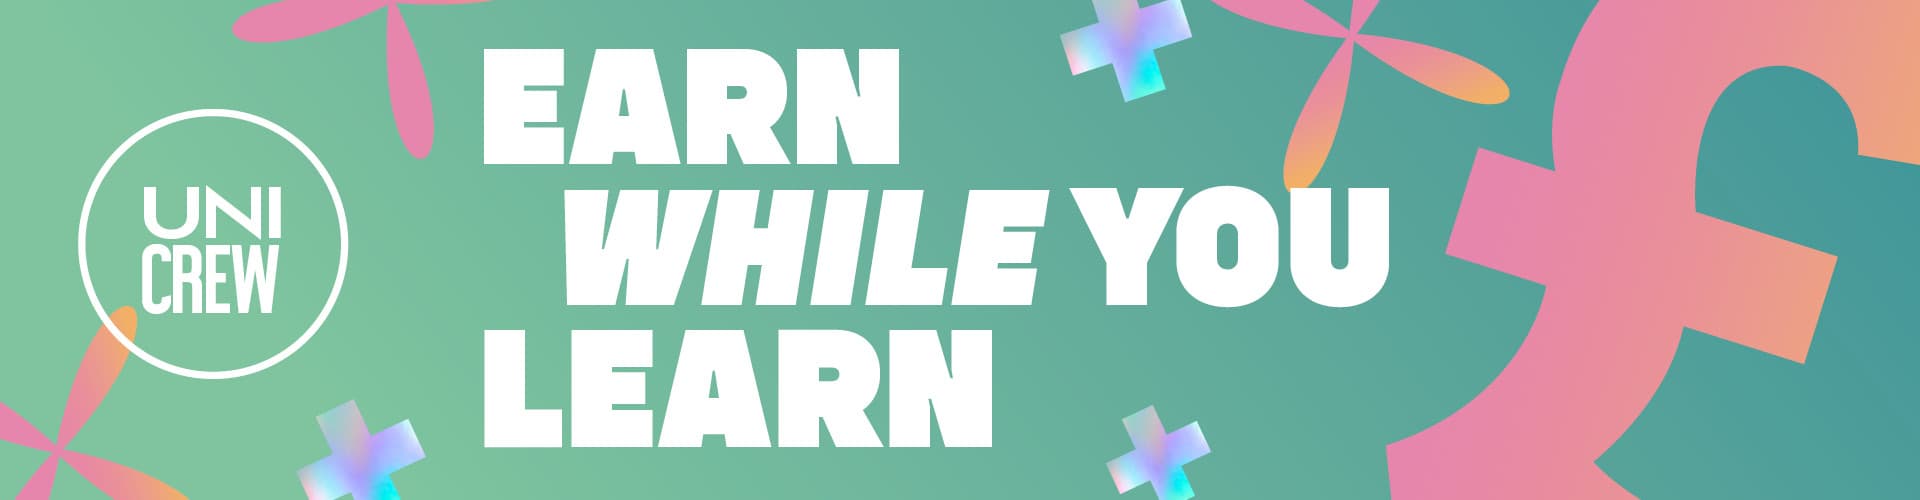 Catch up with the crew | Earn while you learn